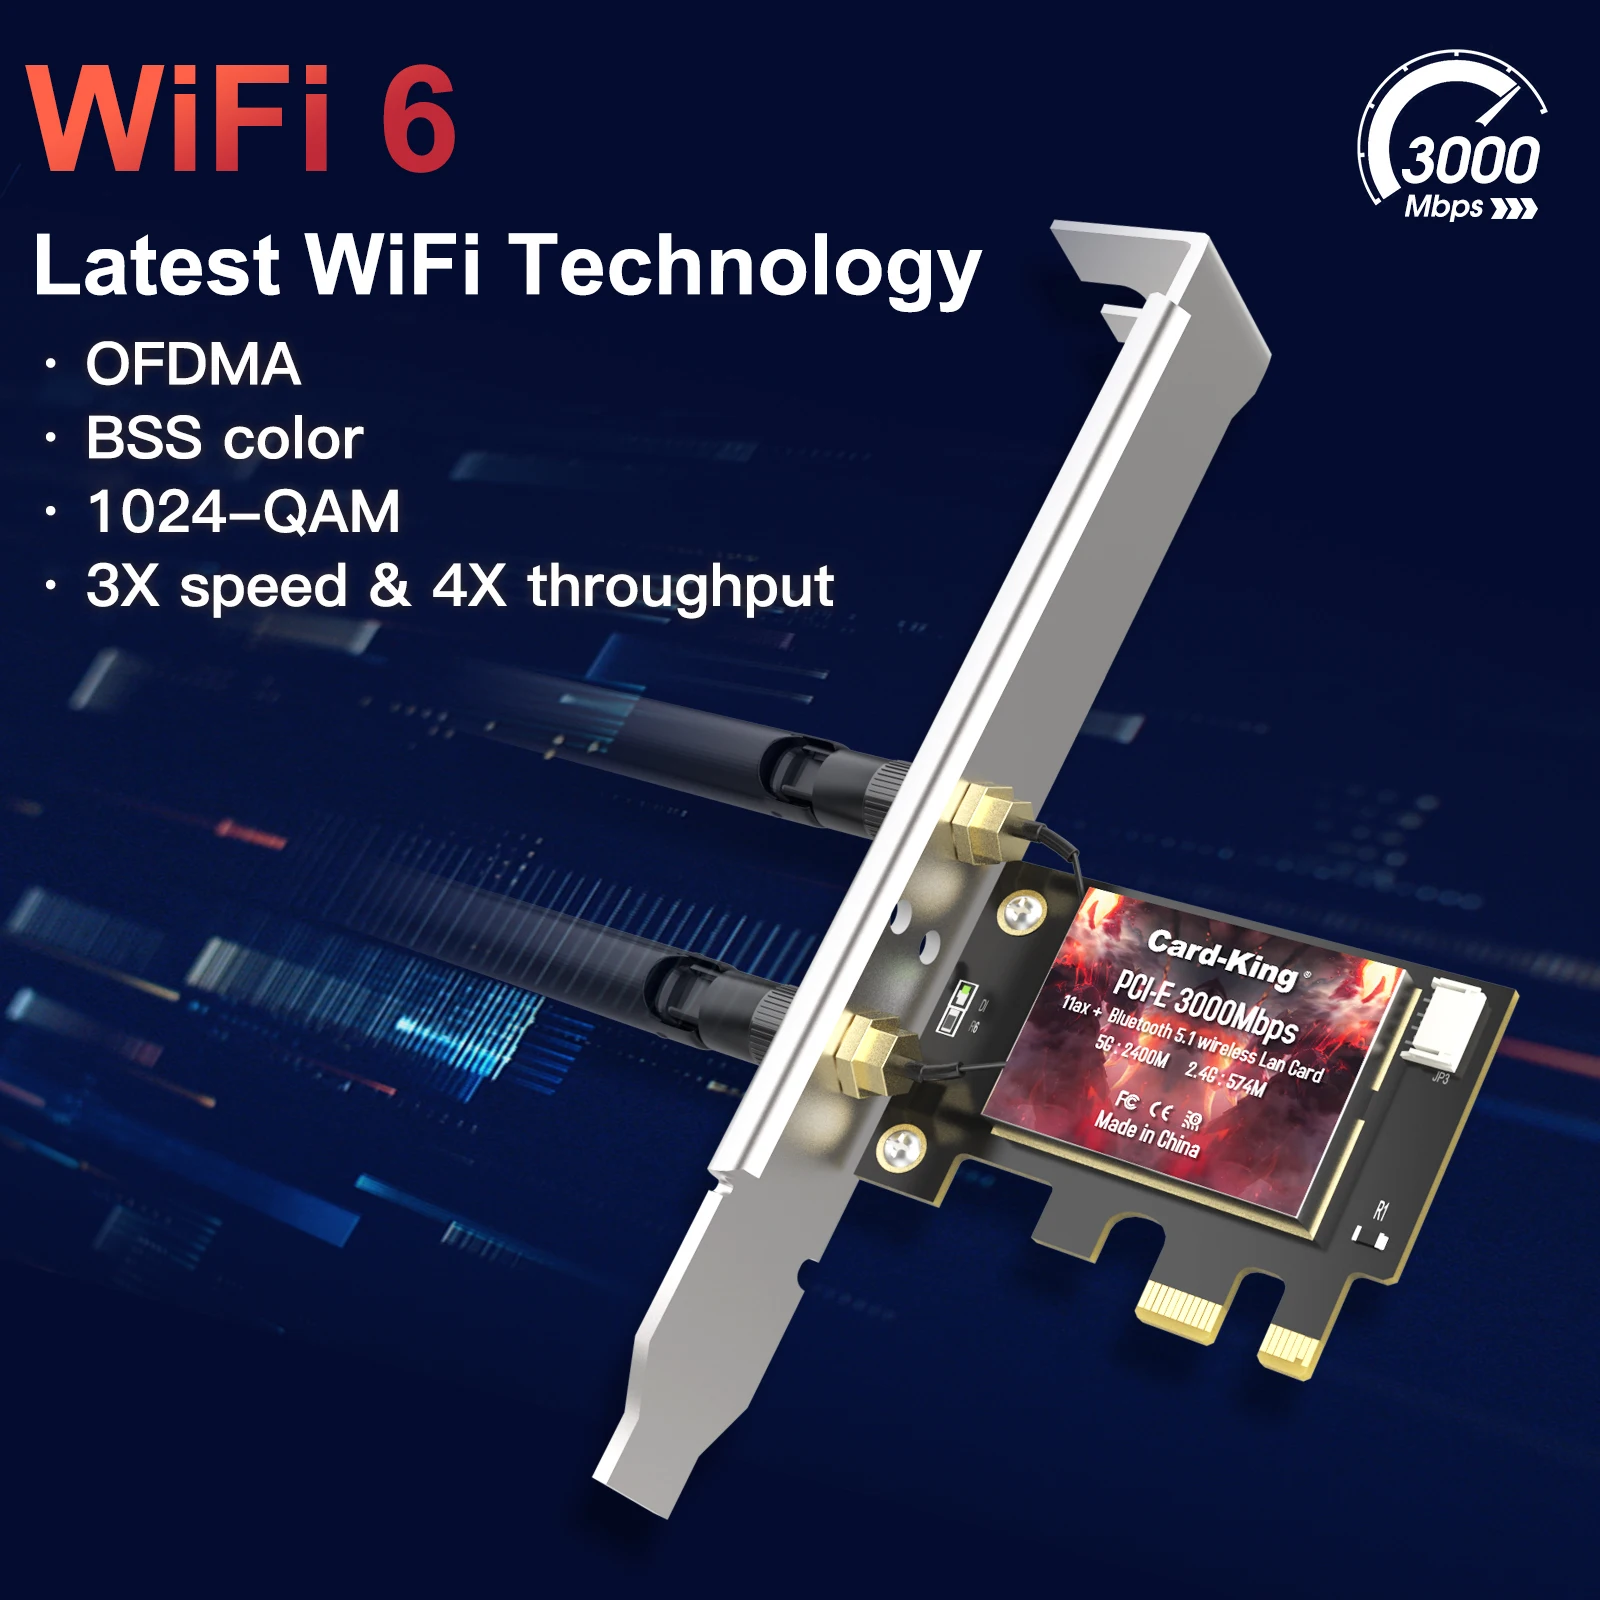 CardKing 3000Mbps WiFi Adapter 6 PCI Express 802.11 AC/AX Intel AX200 PCIe Network Card 2.4 G/5GHz Bluetooth 5.1, Wi-Fi Dual Band